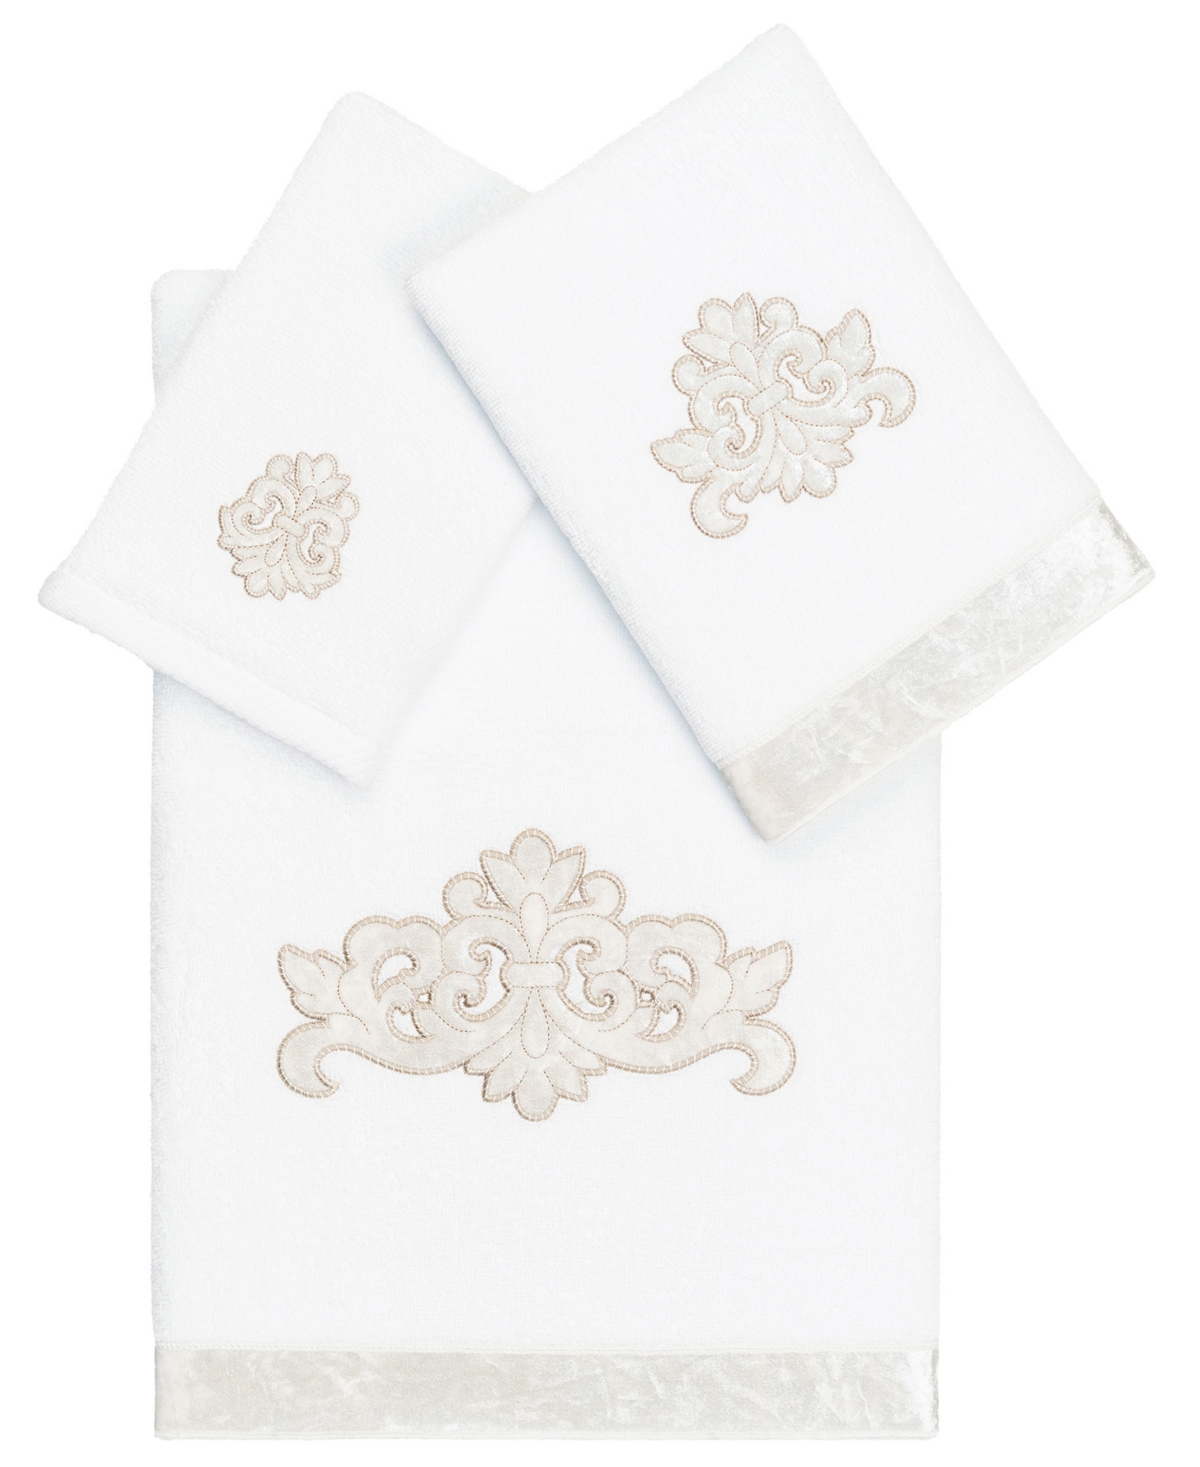 Linum Home Textiles Turkish Cotton May Embellished Towel Set, 3 Piece Bedding In White